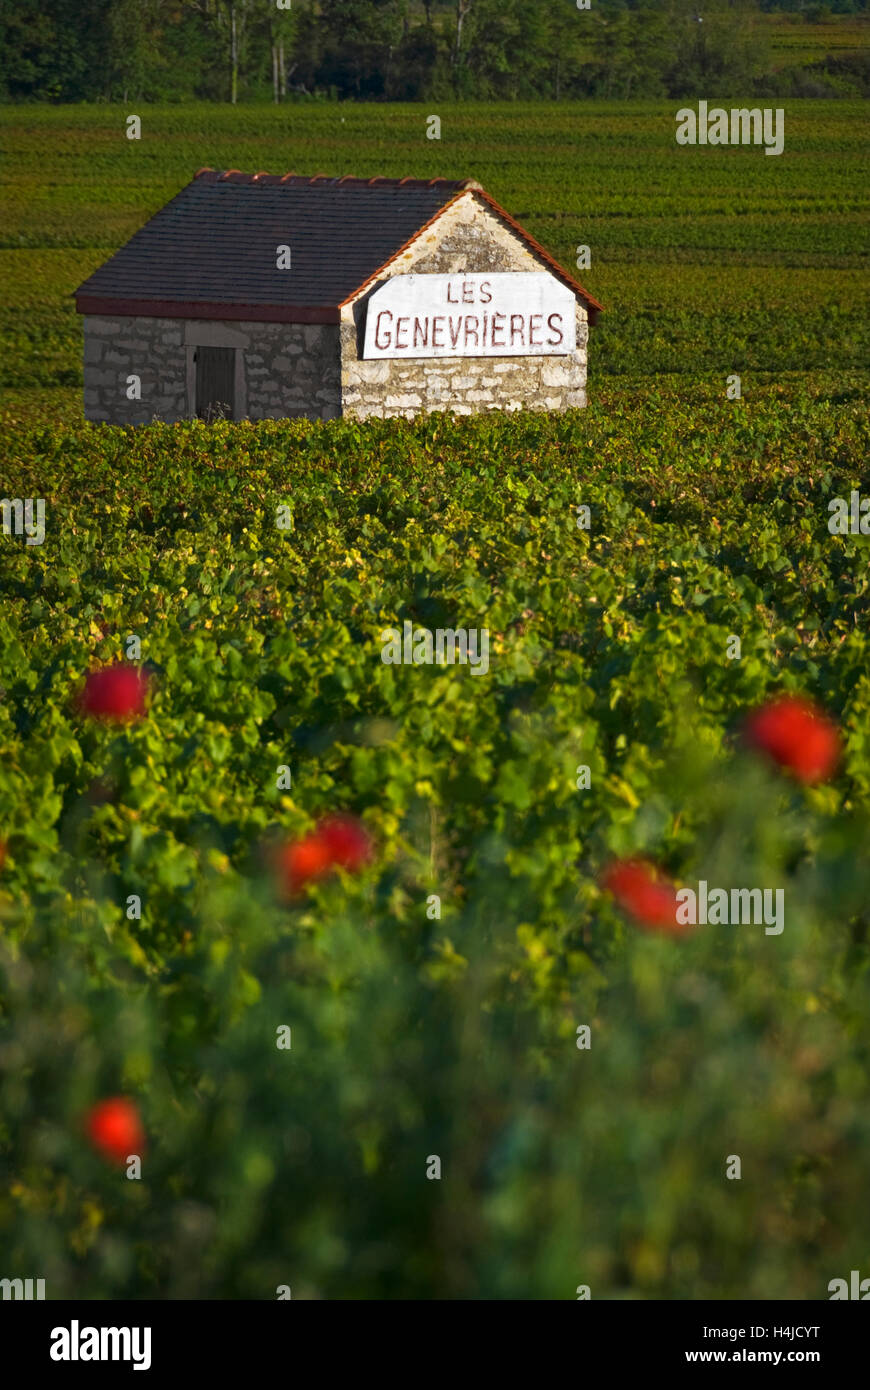 Grape pickers stone refuge in Les Genevrières vineyard poppies in foreground. Meursault, Burgundy Côte d'Or, France. Stock Photo